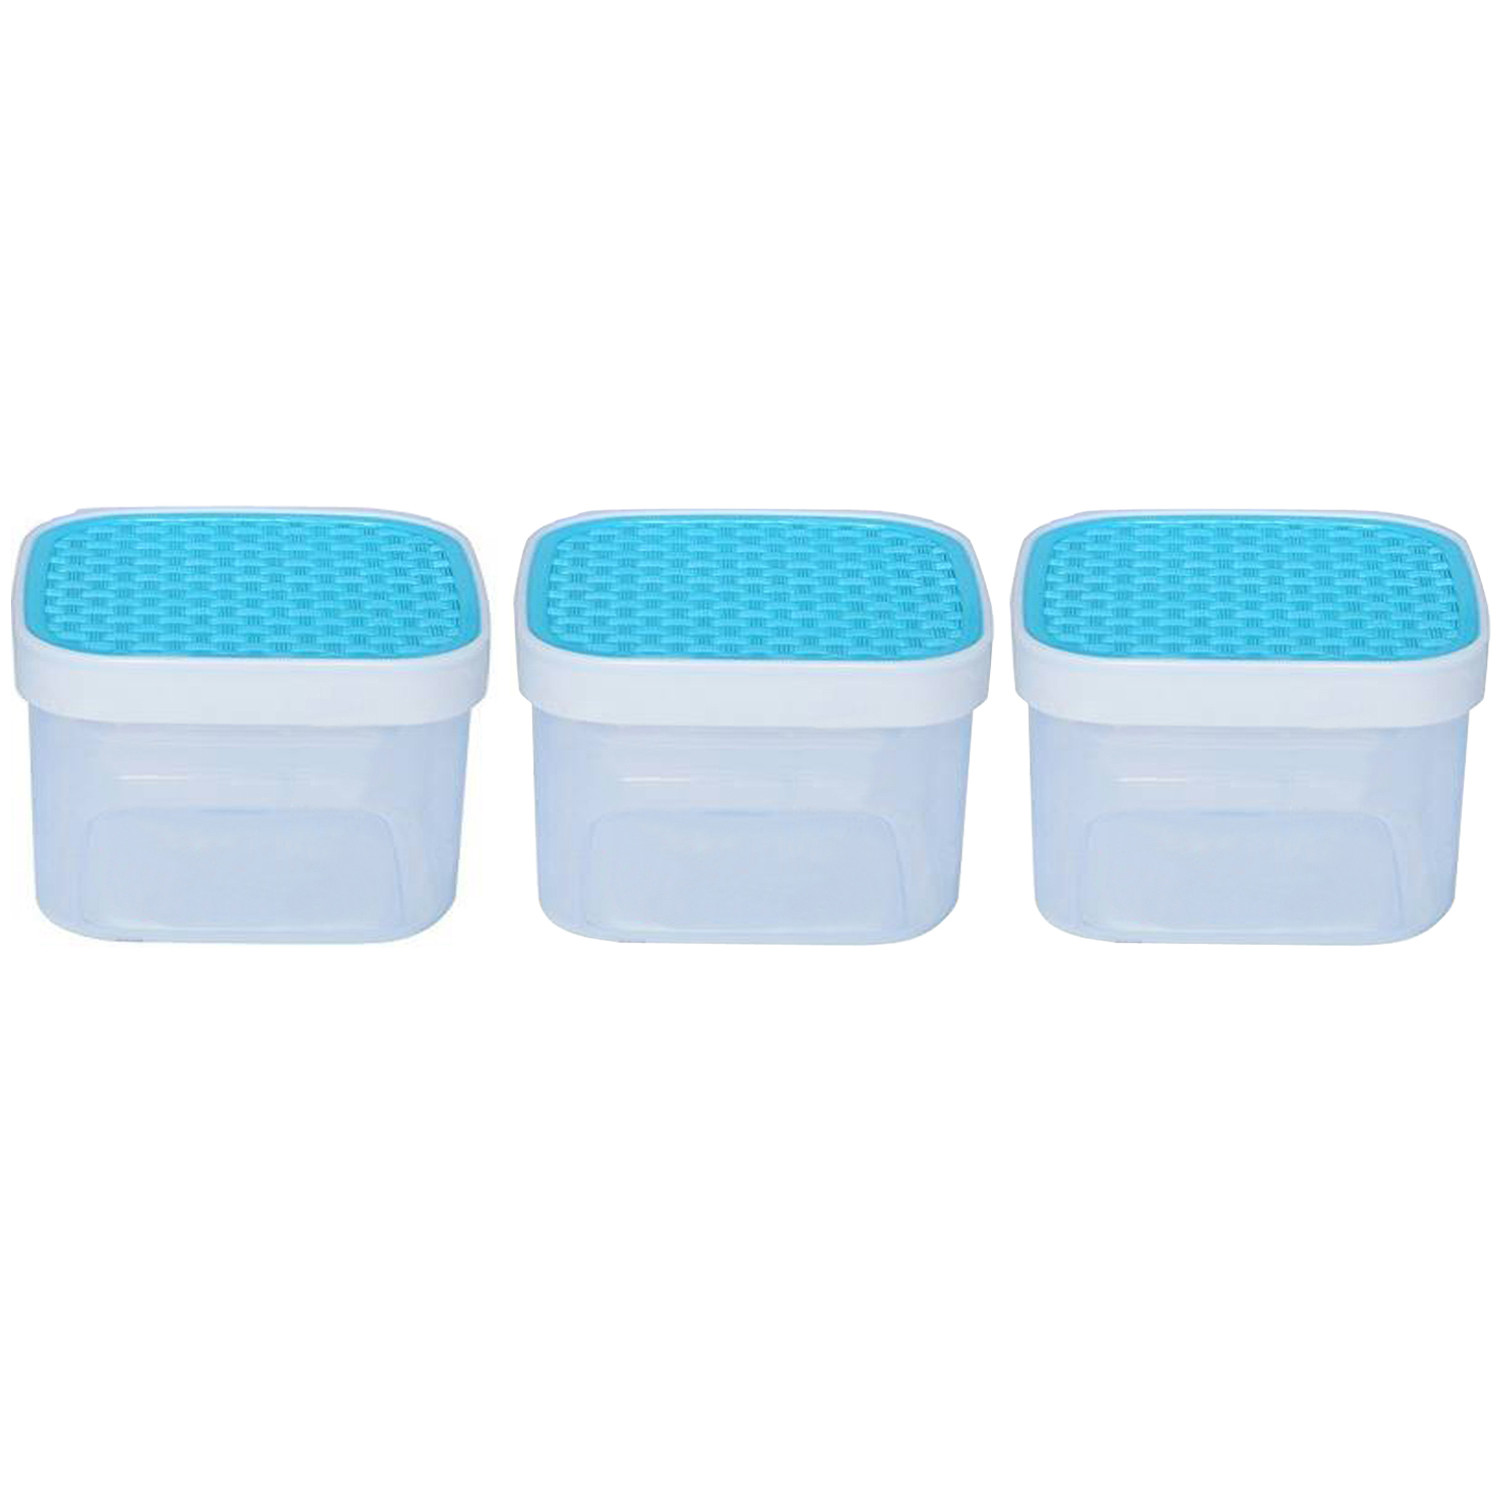 Kuber Industries Check Deisgn Lid  Multi Purpose Plastic Container,1200ml, Set of 12 (White & Blue)